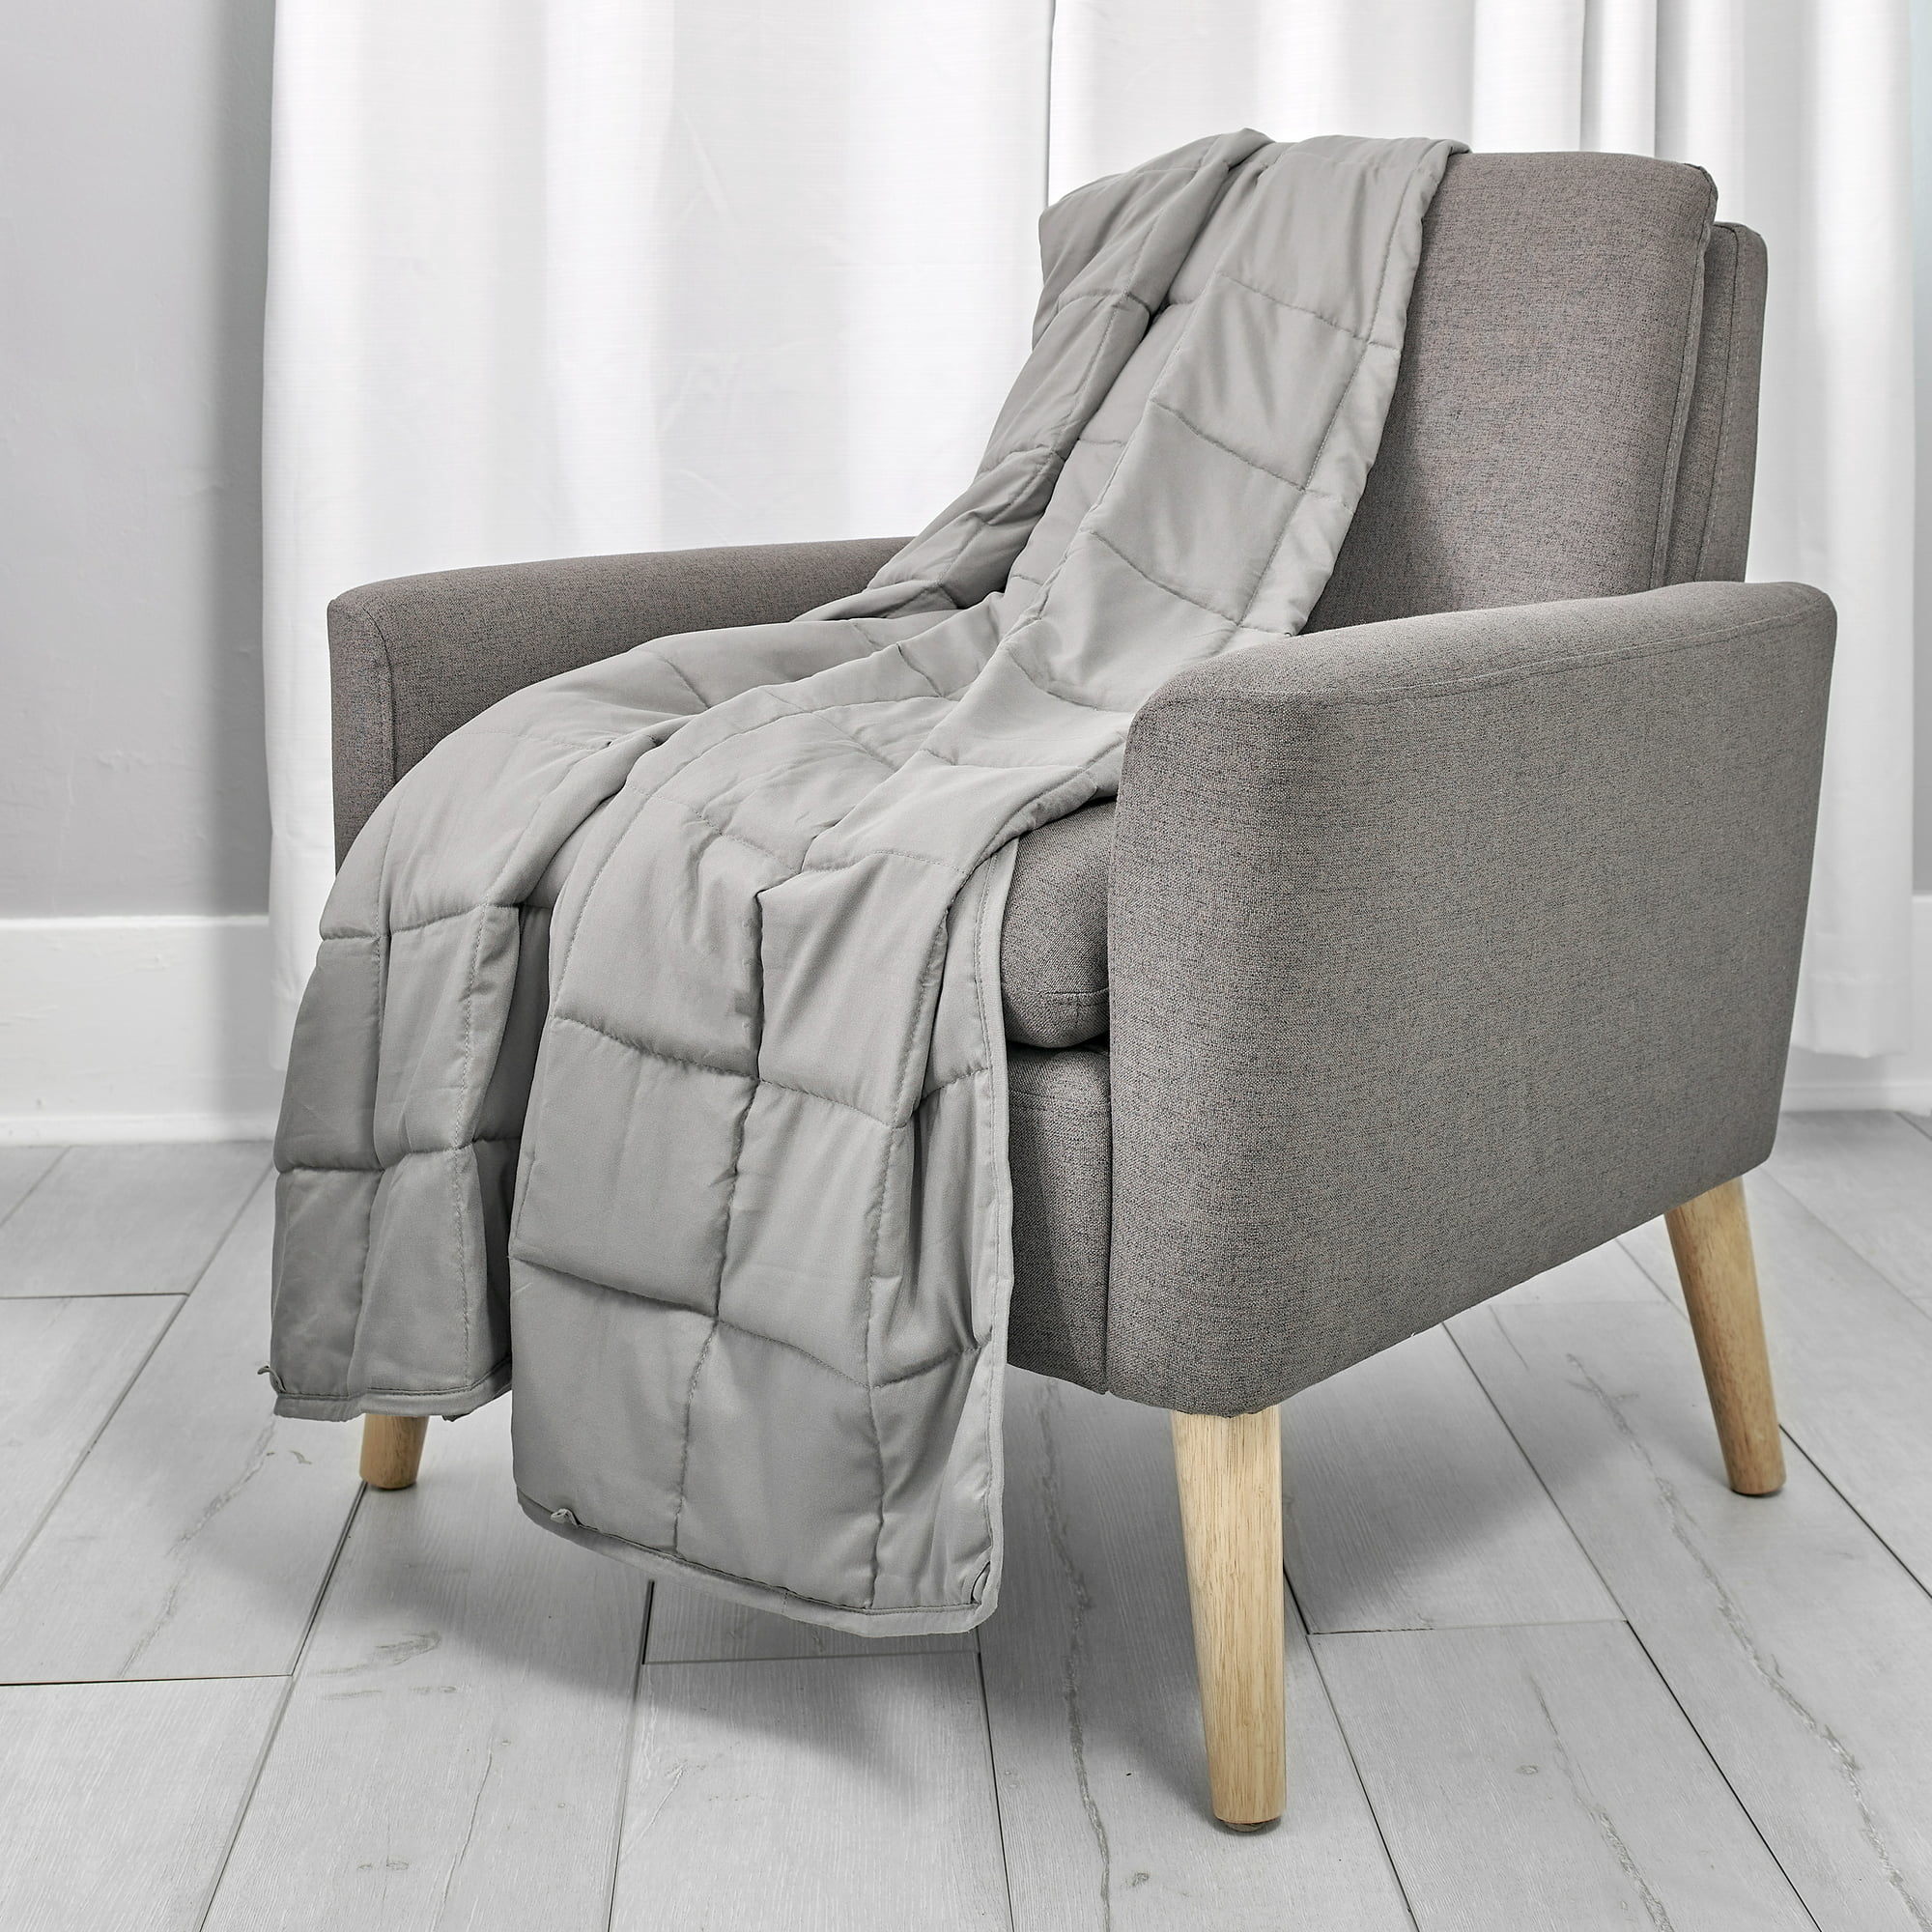 the gray weighted blanket